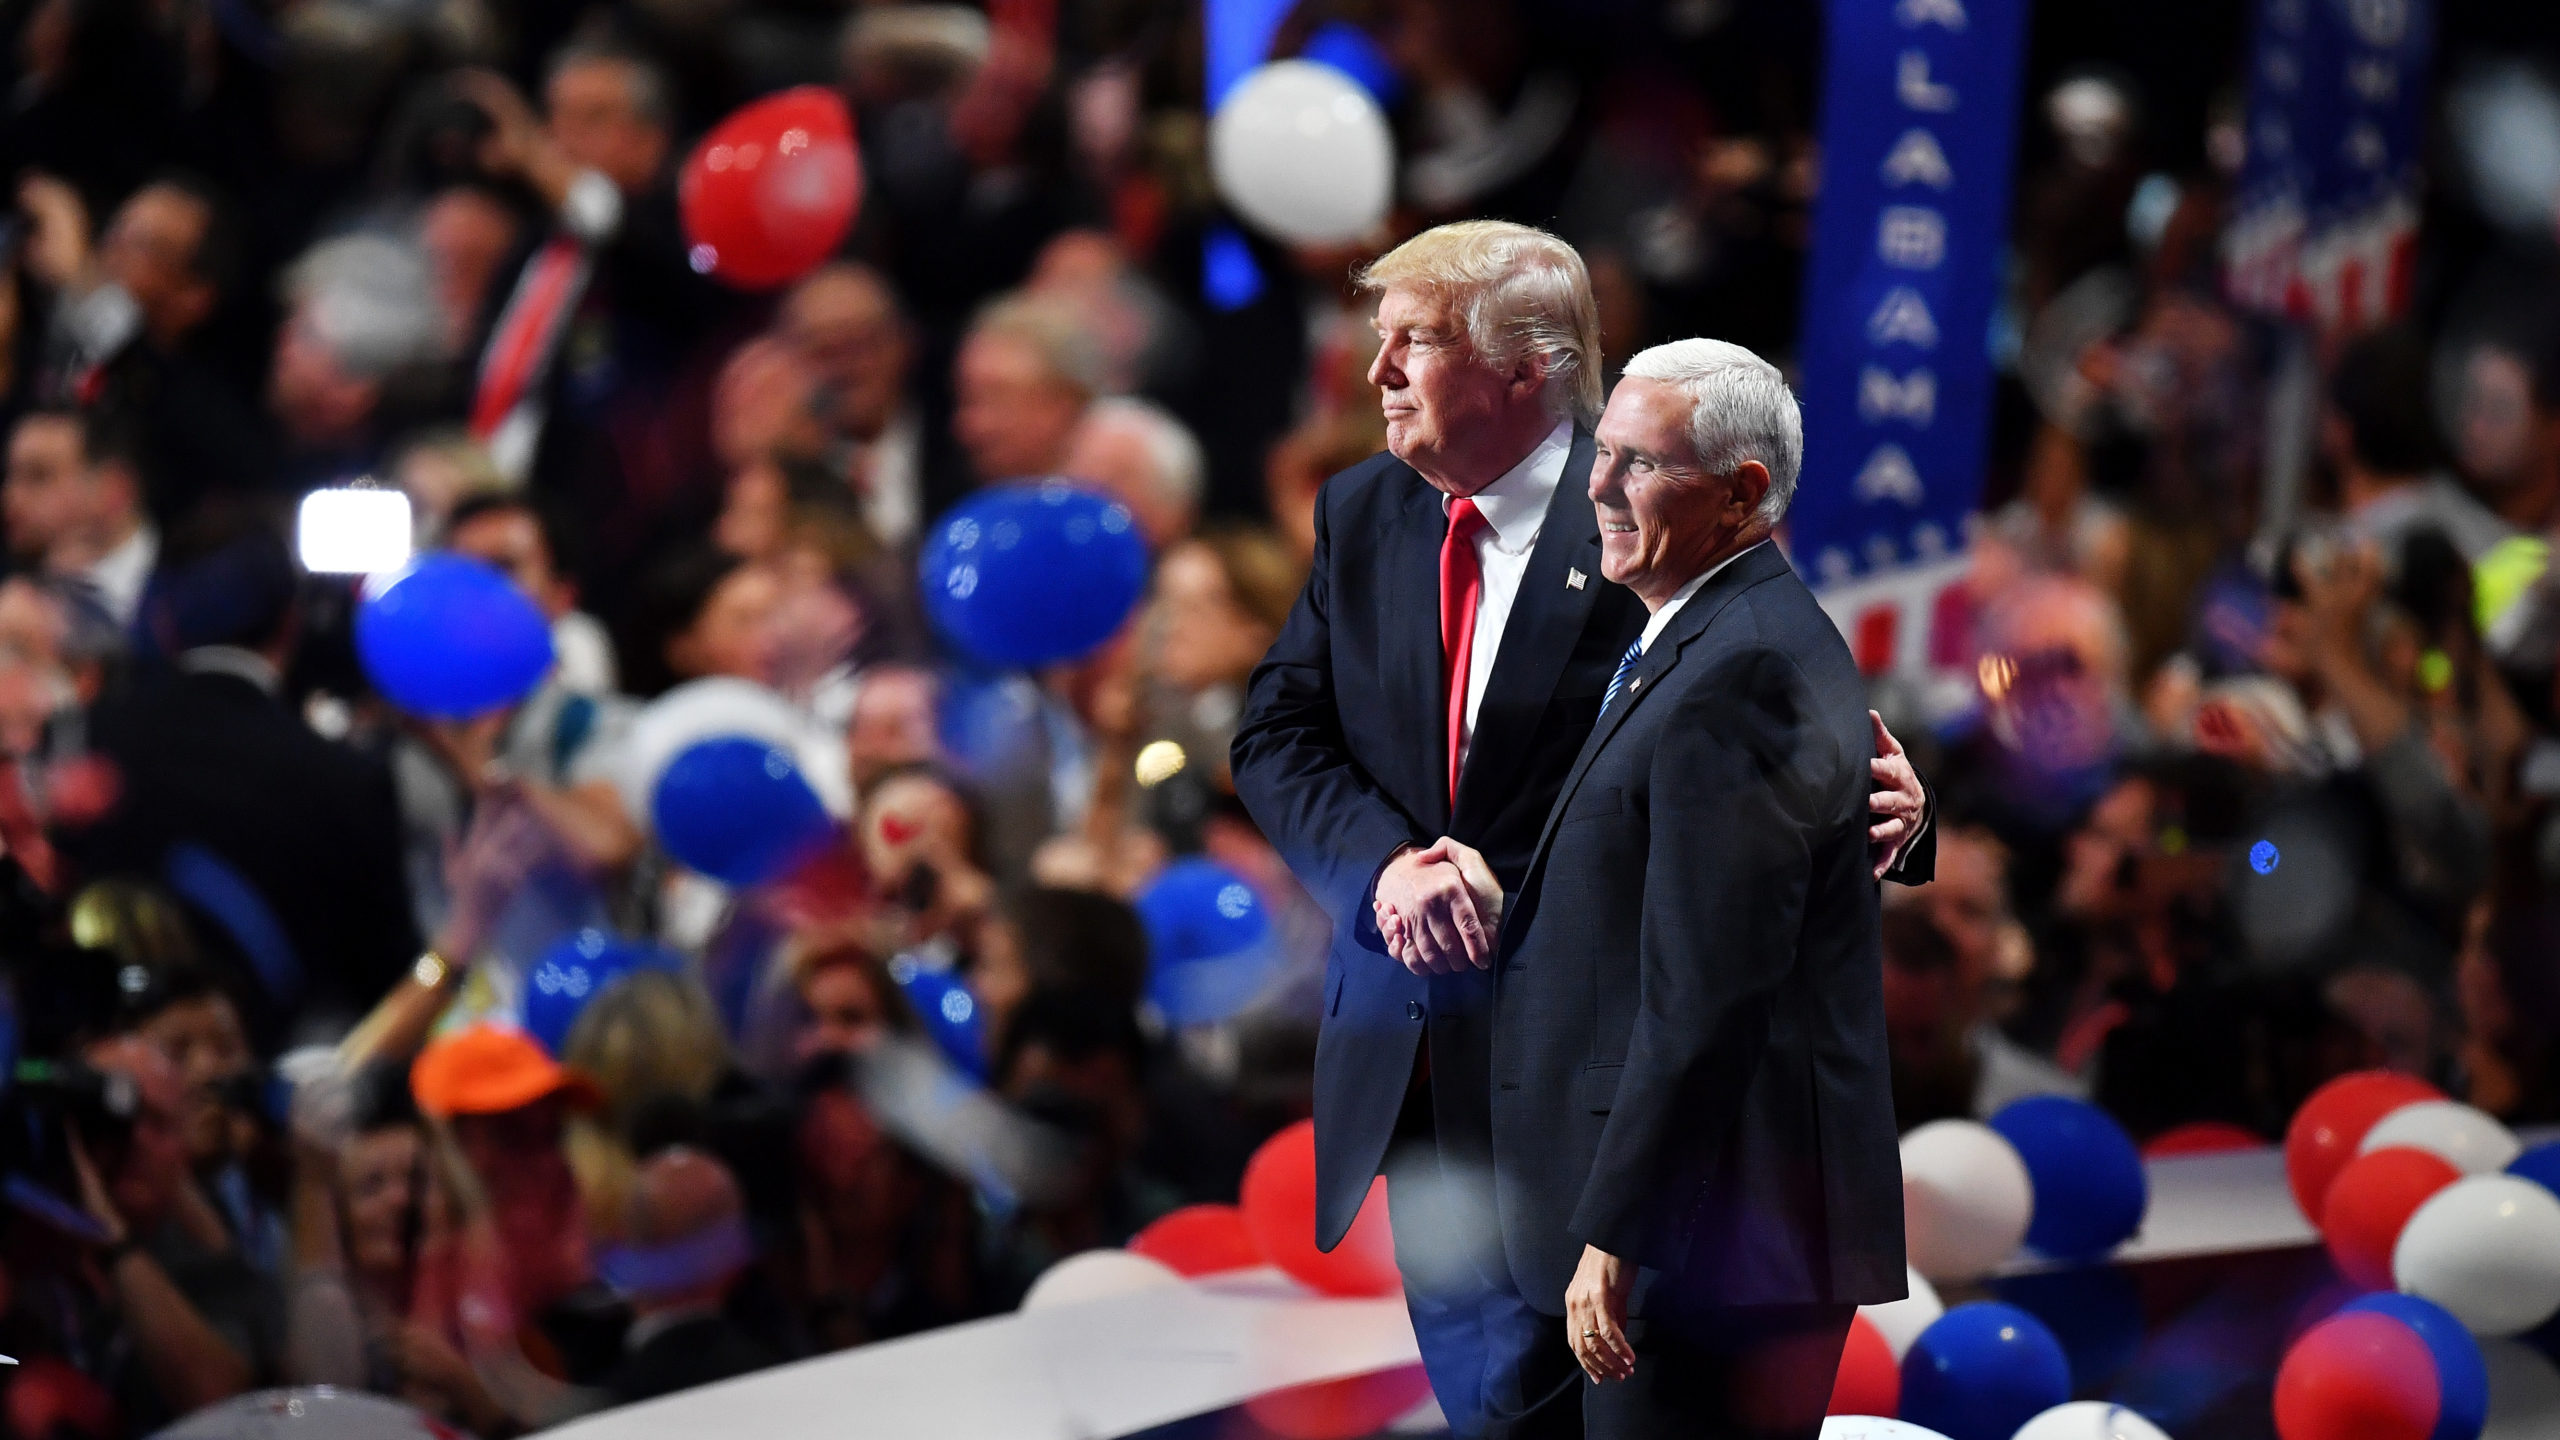 Republican presidential candidate Donald Trump and vice presidential candidate Mike Pence acknowledge the crowd at the end of the Republican National Convention on July 21, 2016. (Photo: Jeff J Mitchell, Getty Images)